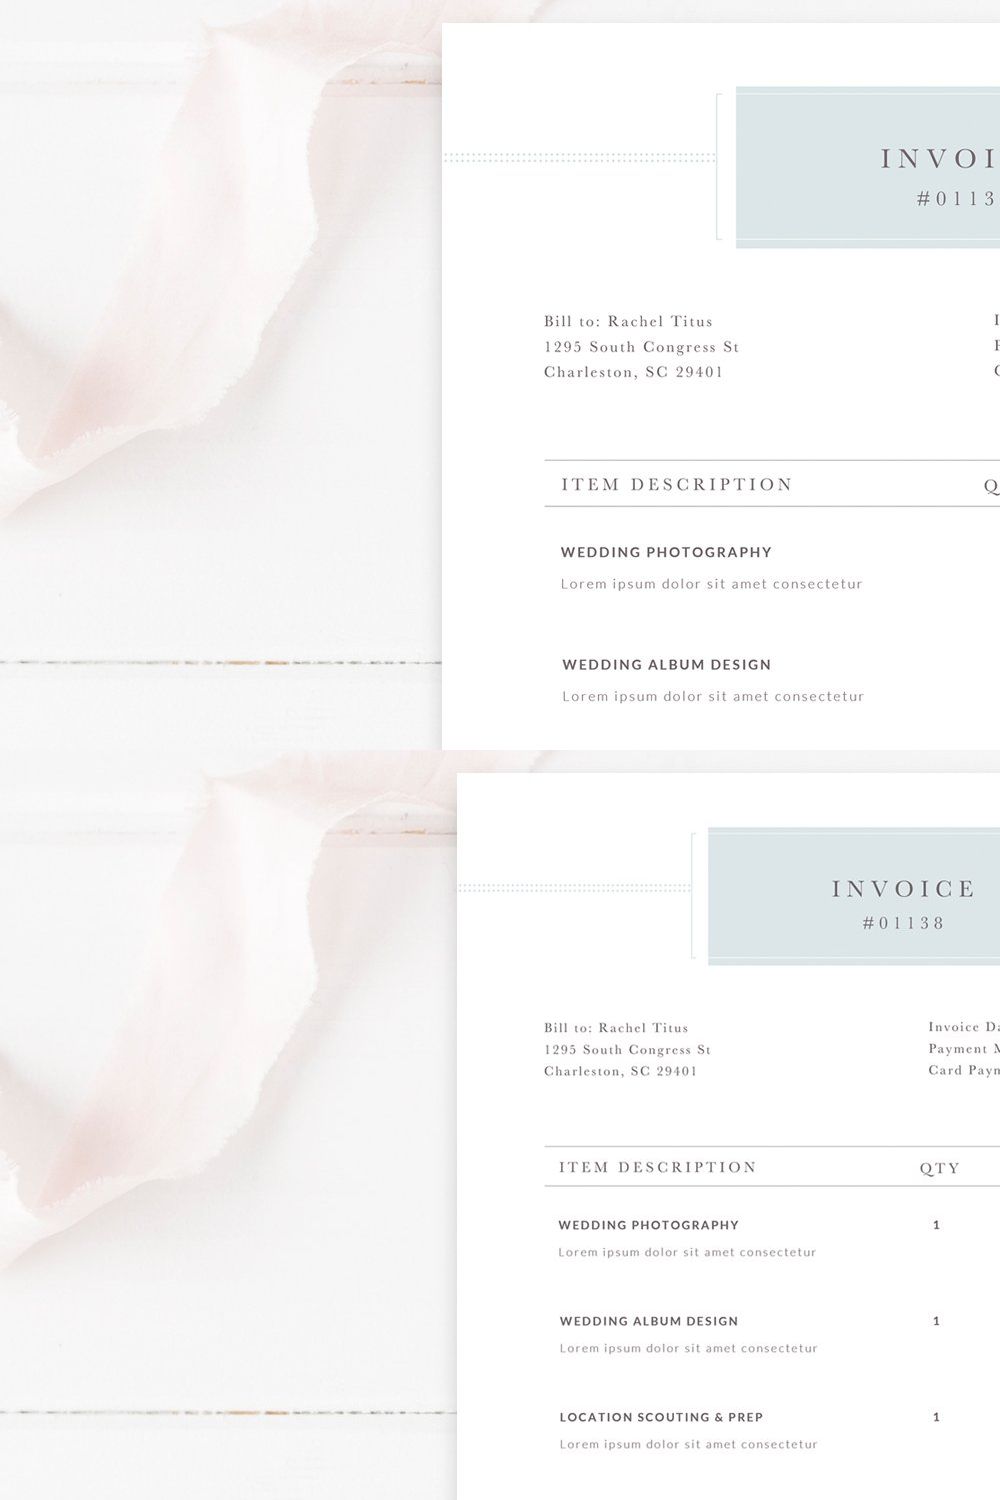 Invoice Receipt for Photographers pinterest preview image.